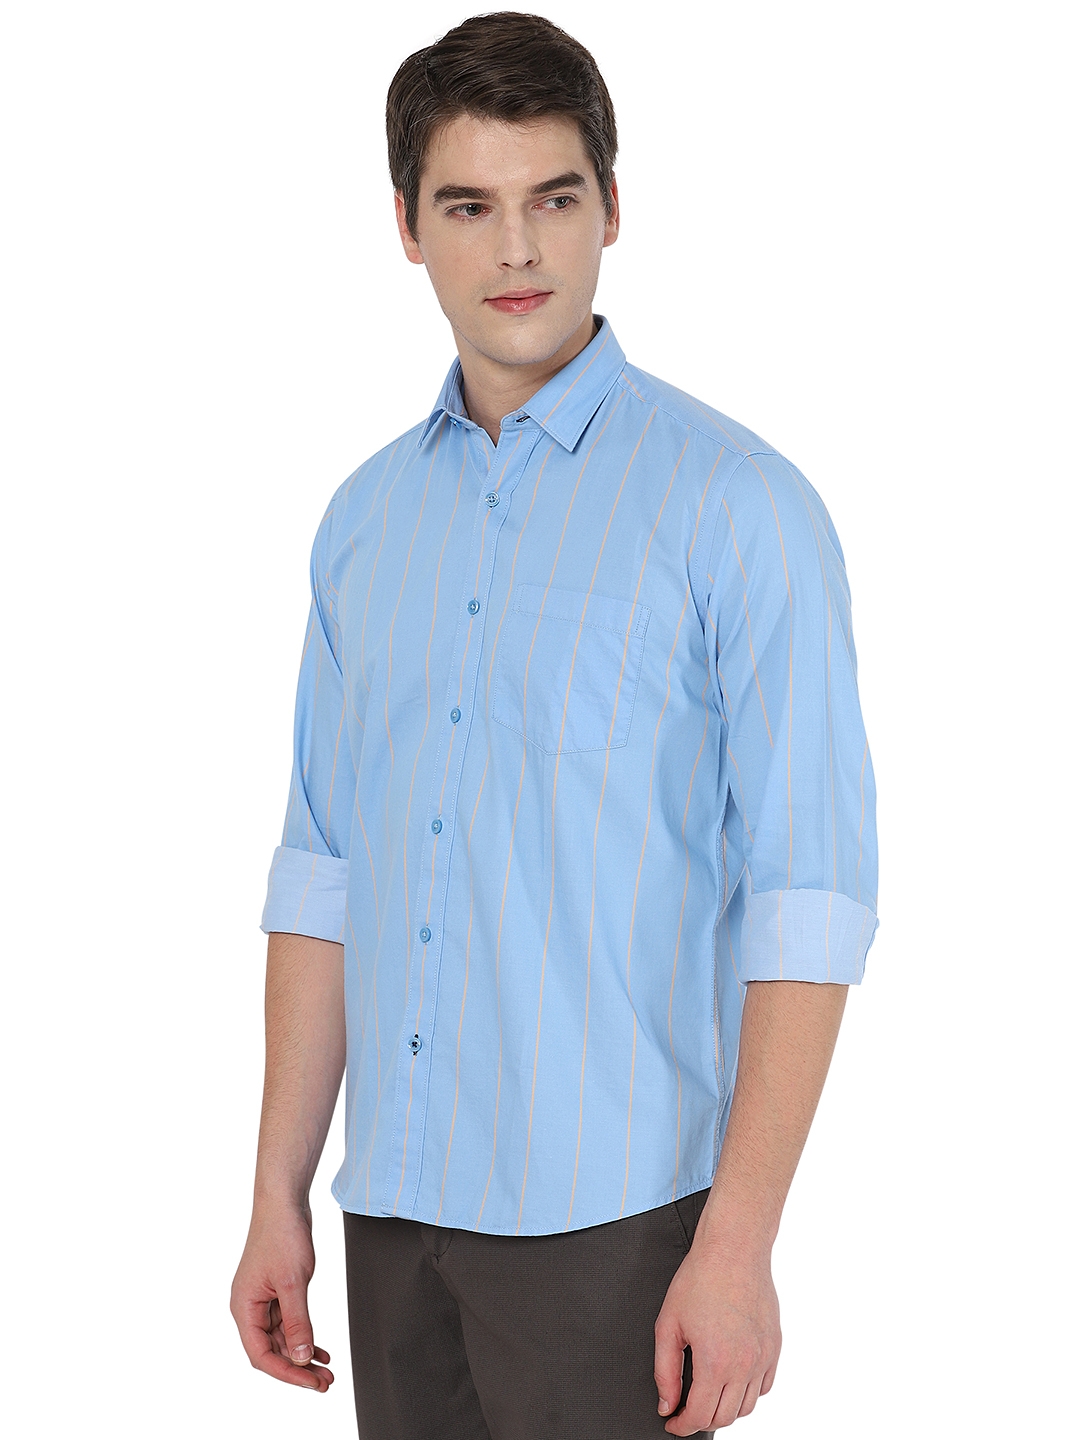 Greenfibre | Light Blue Striped Slim Fit Casual Shirt | Greenfibre 1